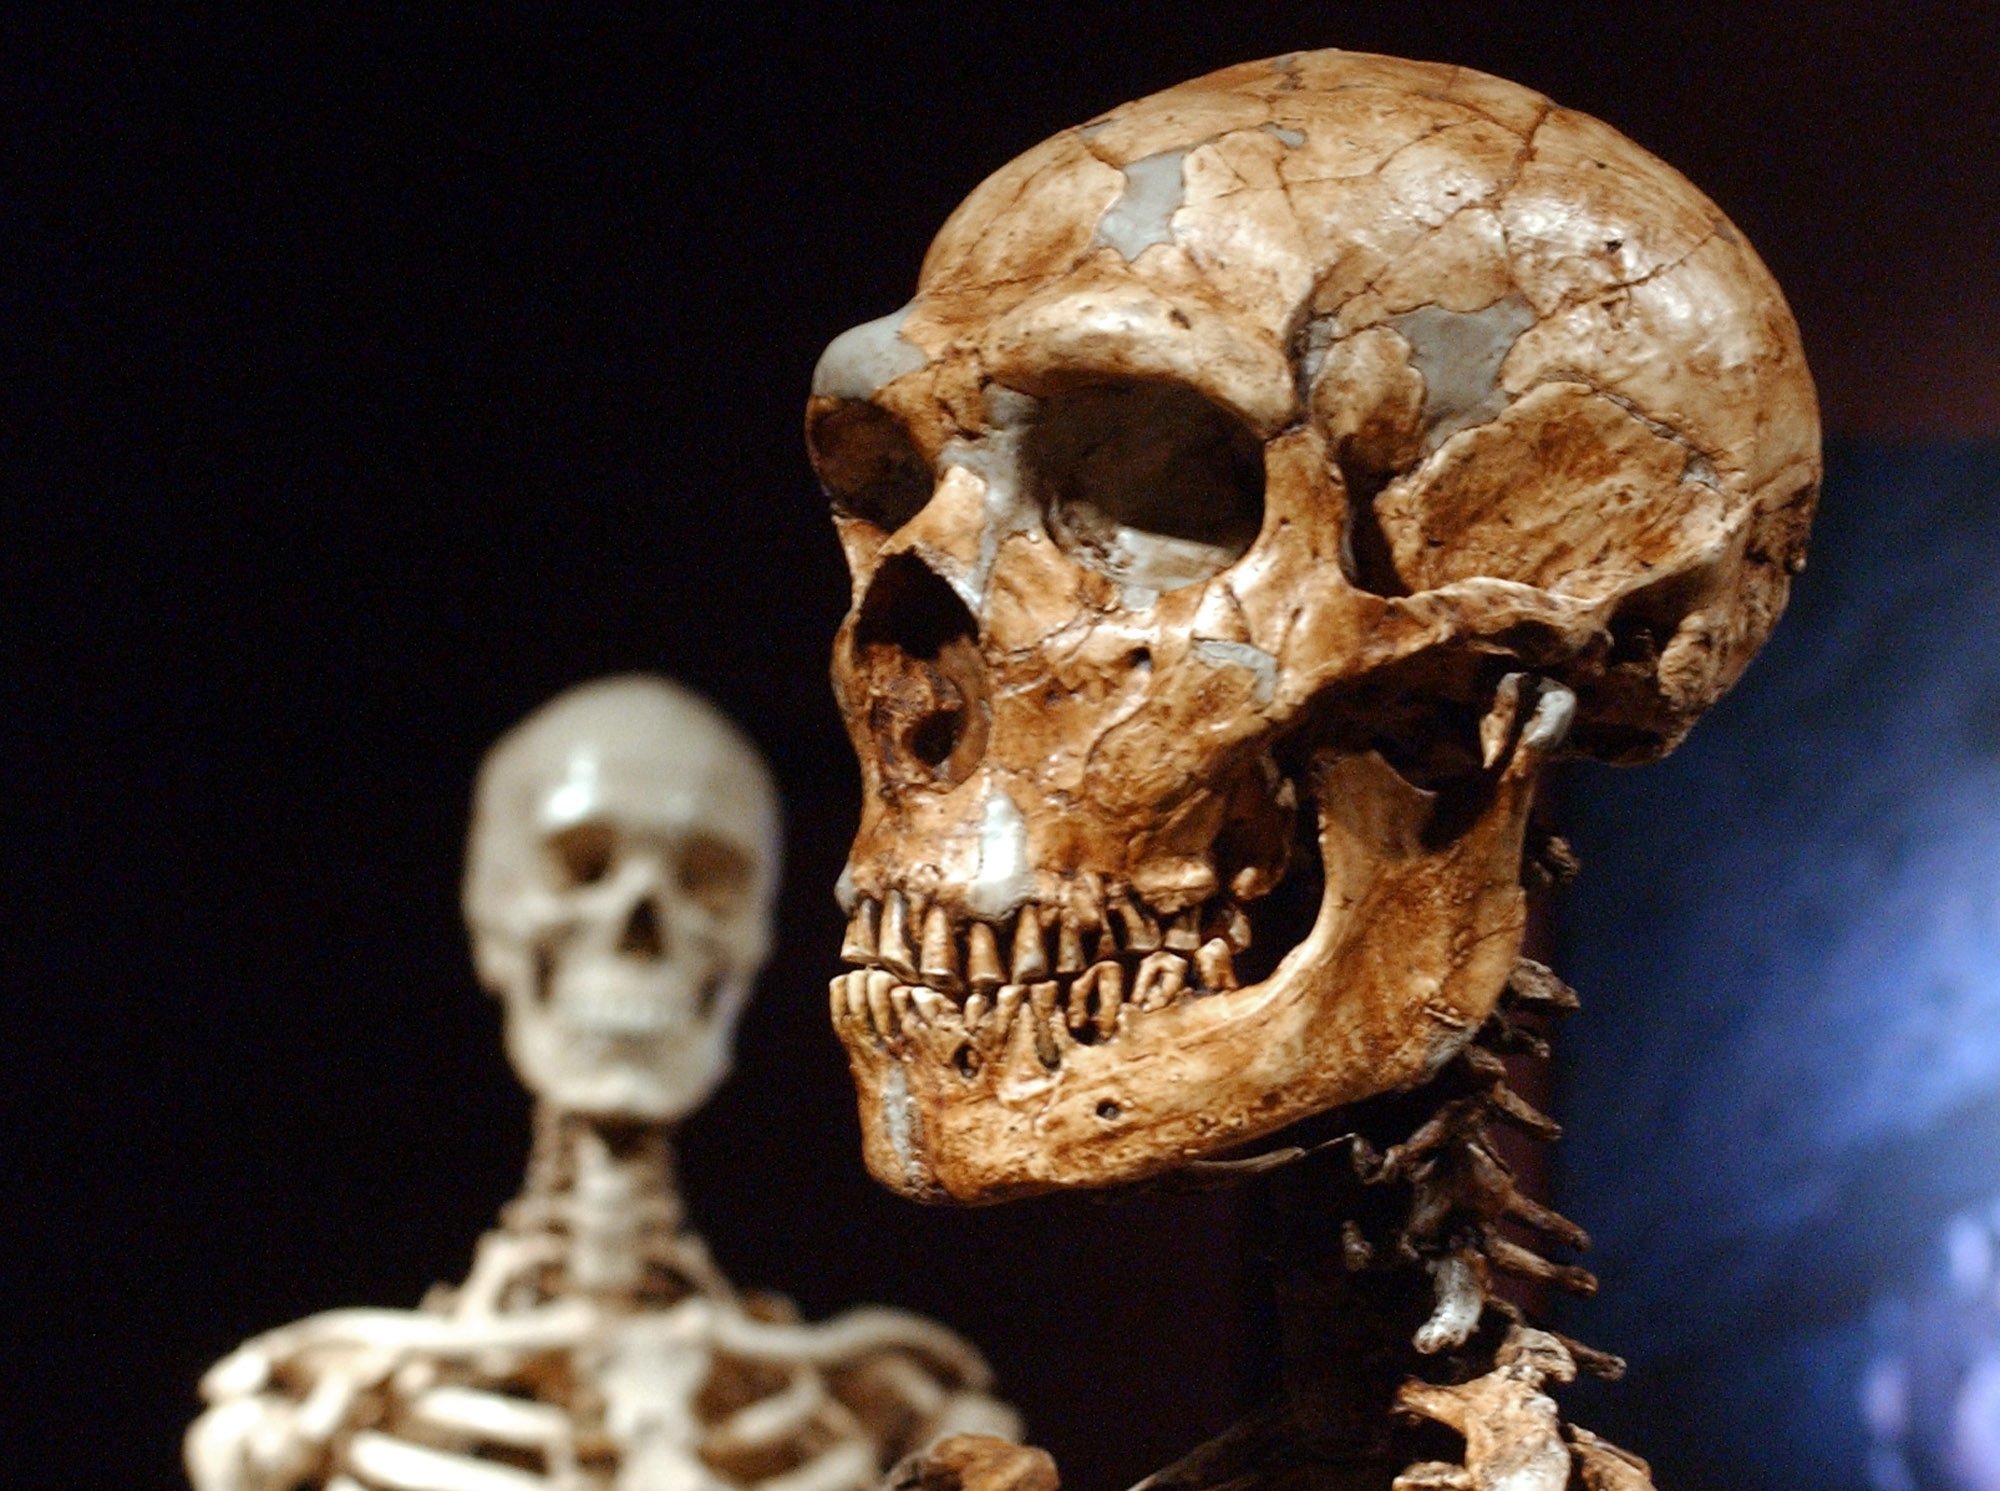 From right: A reconstructed Neanderthal skeleton and a modern human version of a skeleton, on display at the Museum of Natural History in New York City, on Jan. 8, 2003. (Frank Franklin II / AP)